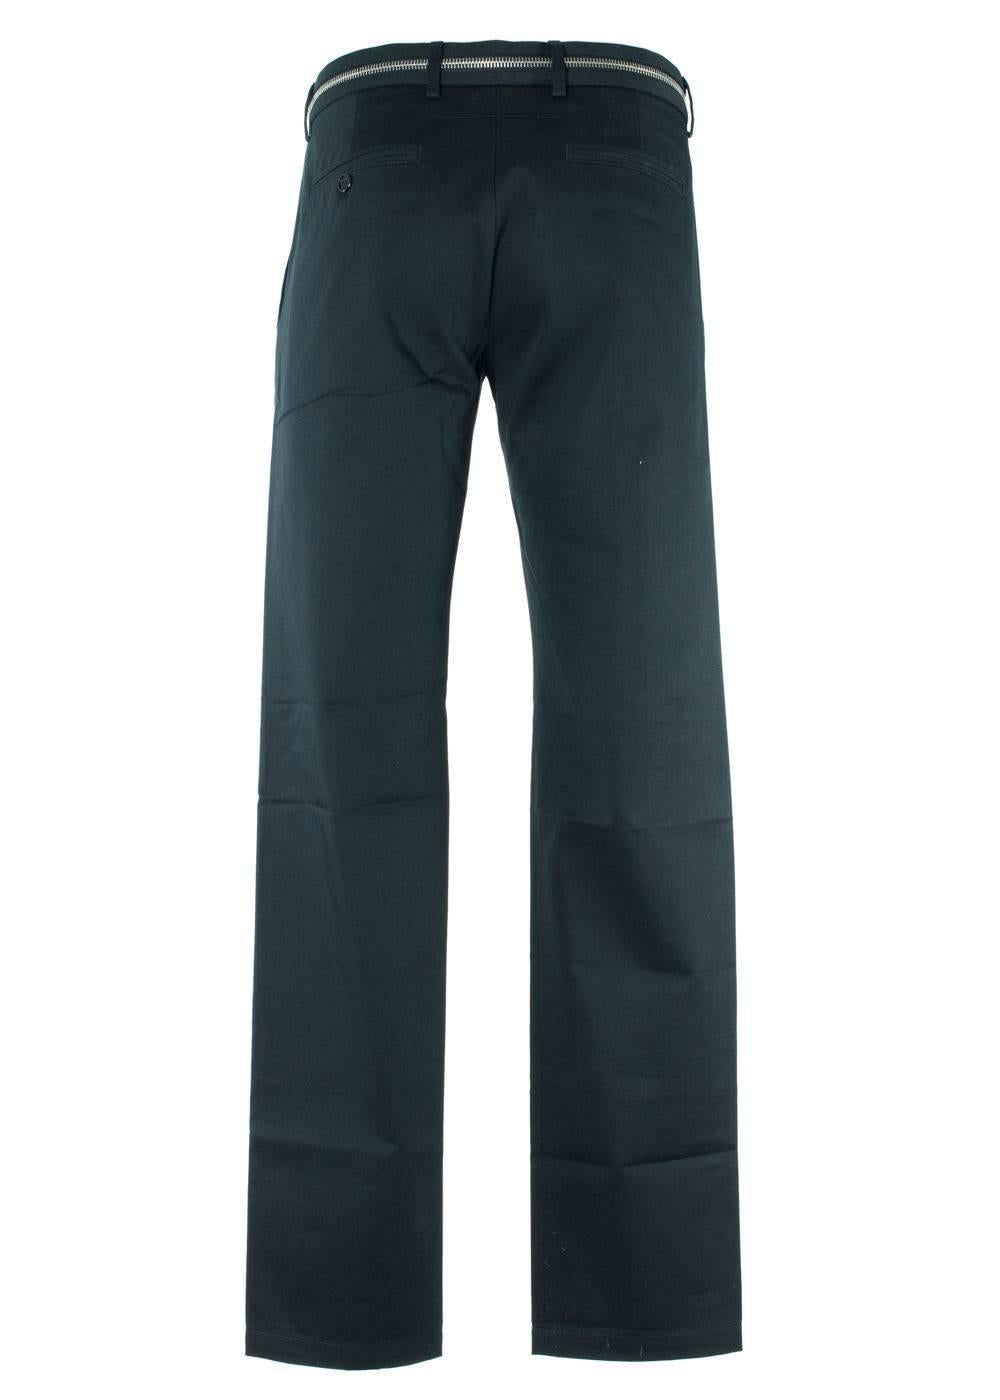 Brand New Givenchy Men's Pants
Original Tag
Retails in Stores & Online for $620
Men's Size EUR 52 / US 36 Fits True to Size

Givenchy's take on a classic pair of black pants with a twist in style by adding a accented zipper highlight to the waist